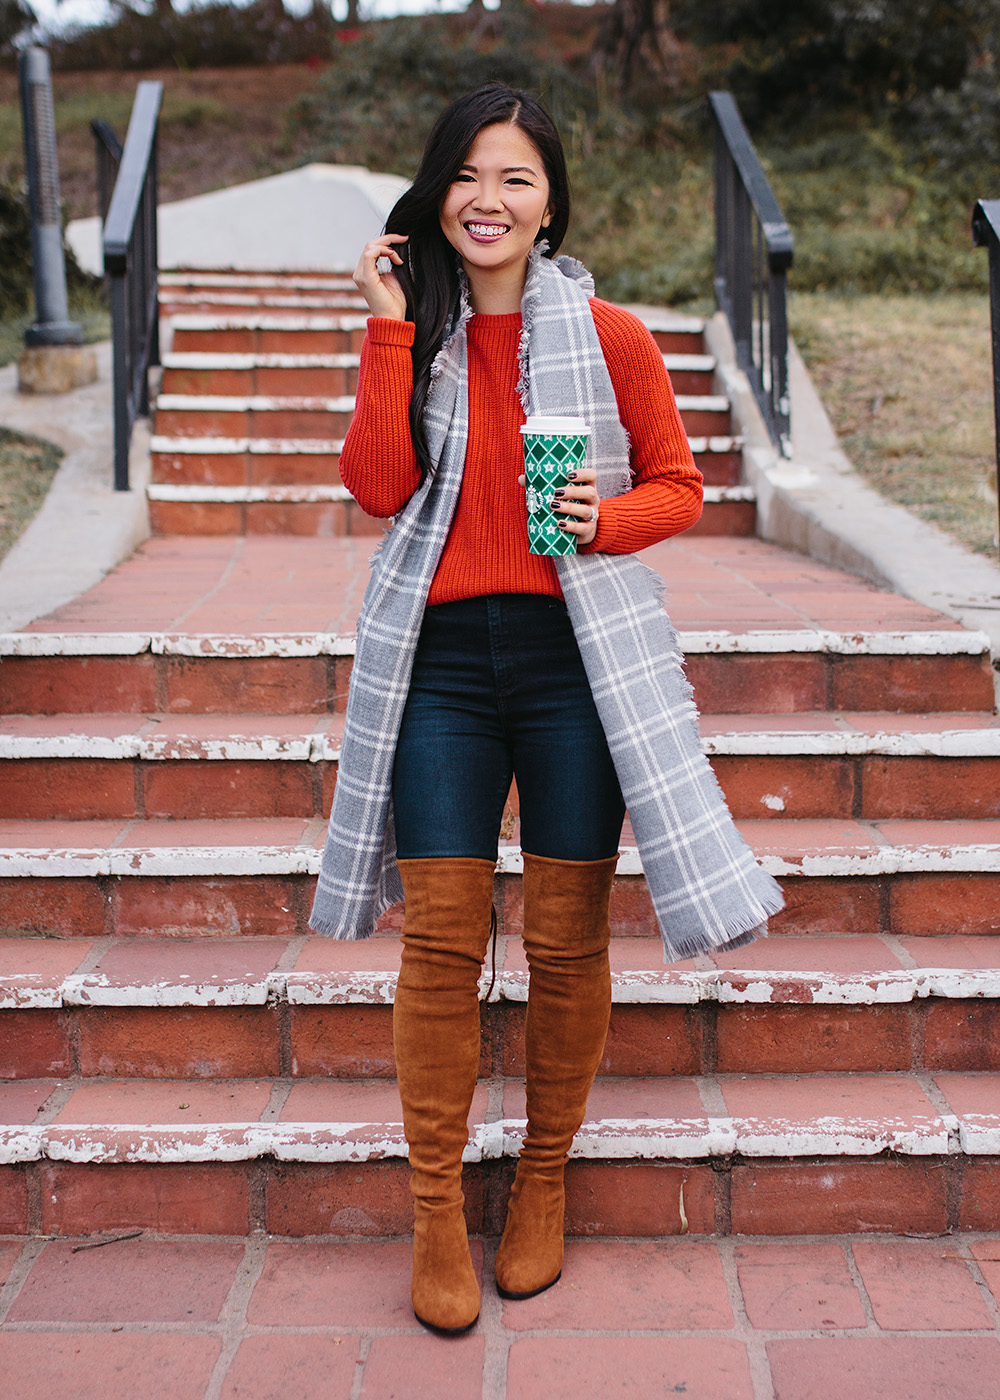 A Casual Holiday Outfit: Red Sweater + Jeans